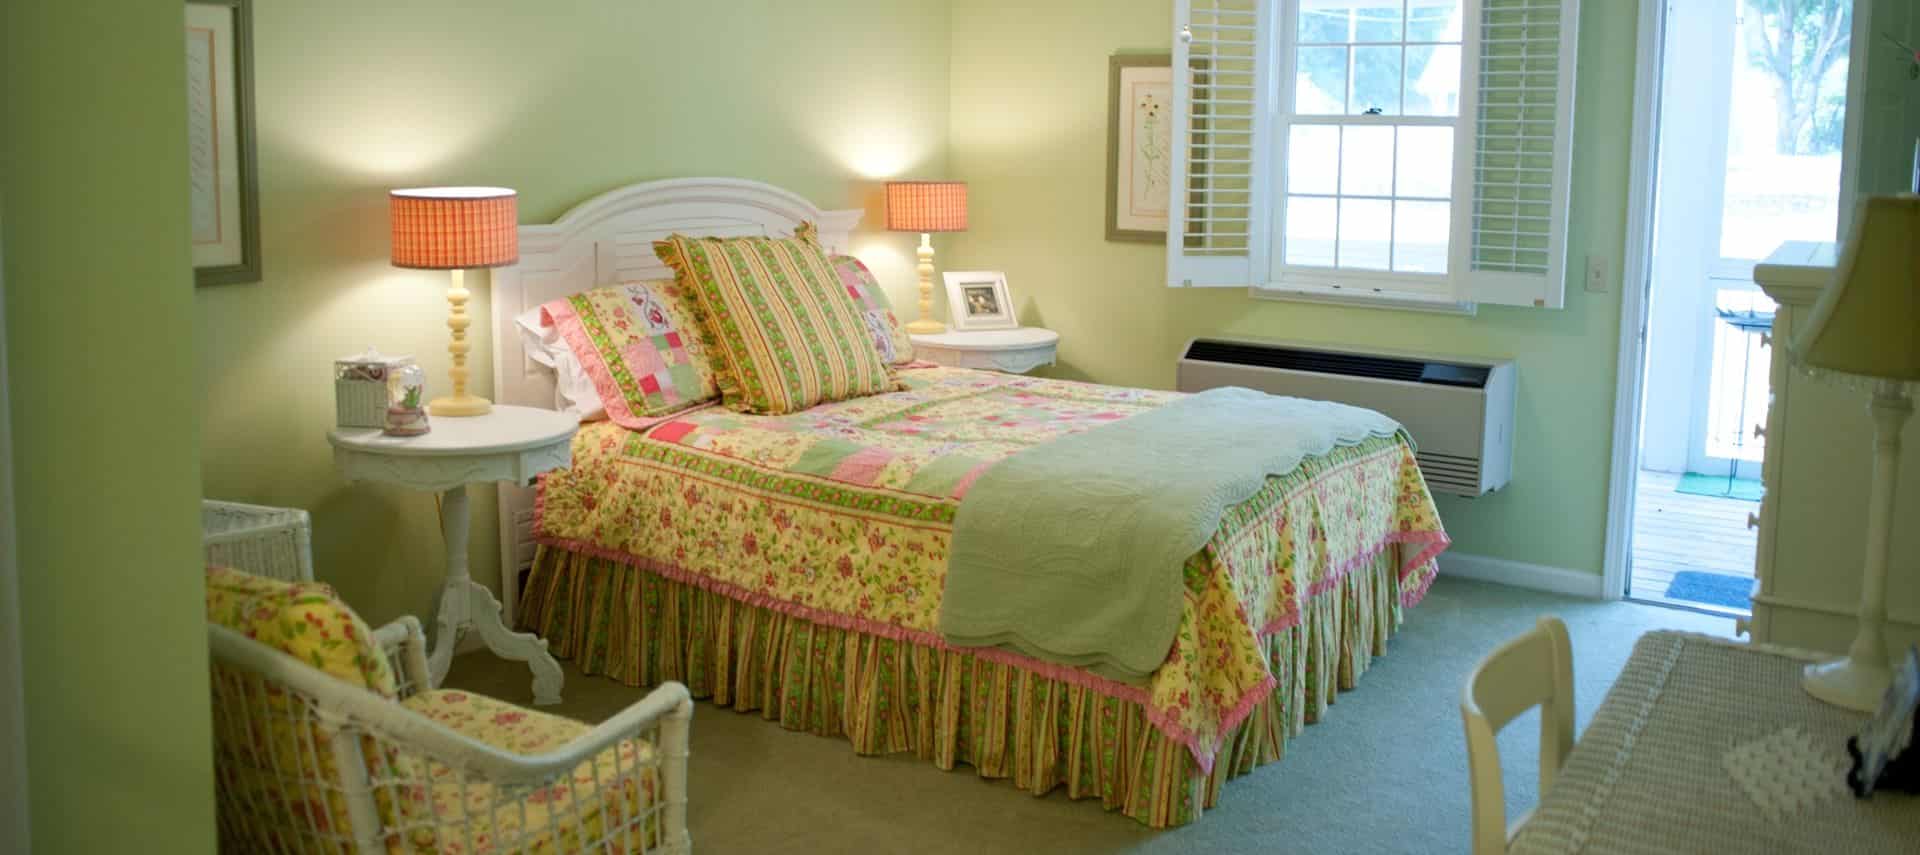 White headboard with sage blanket and green, yellow, and pink comforter next to white side tables